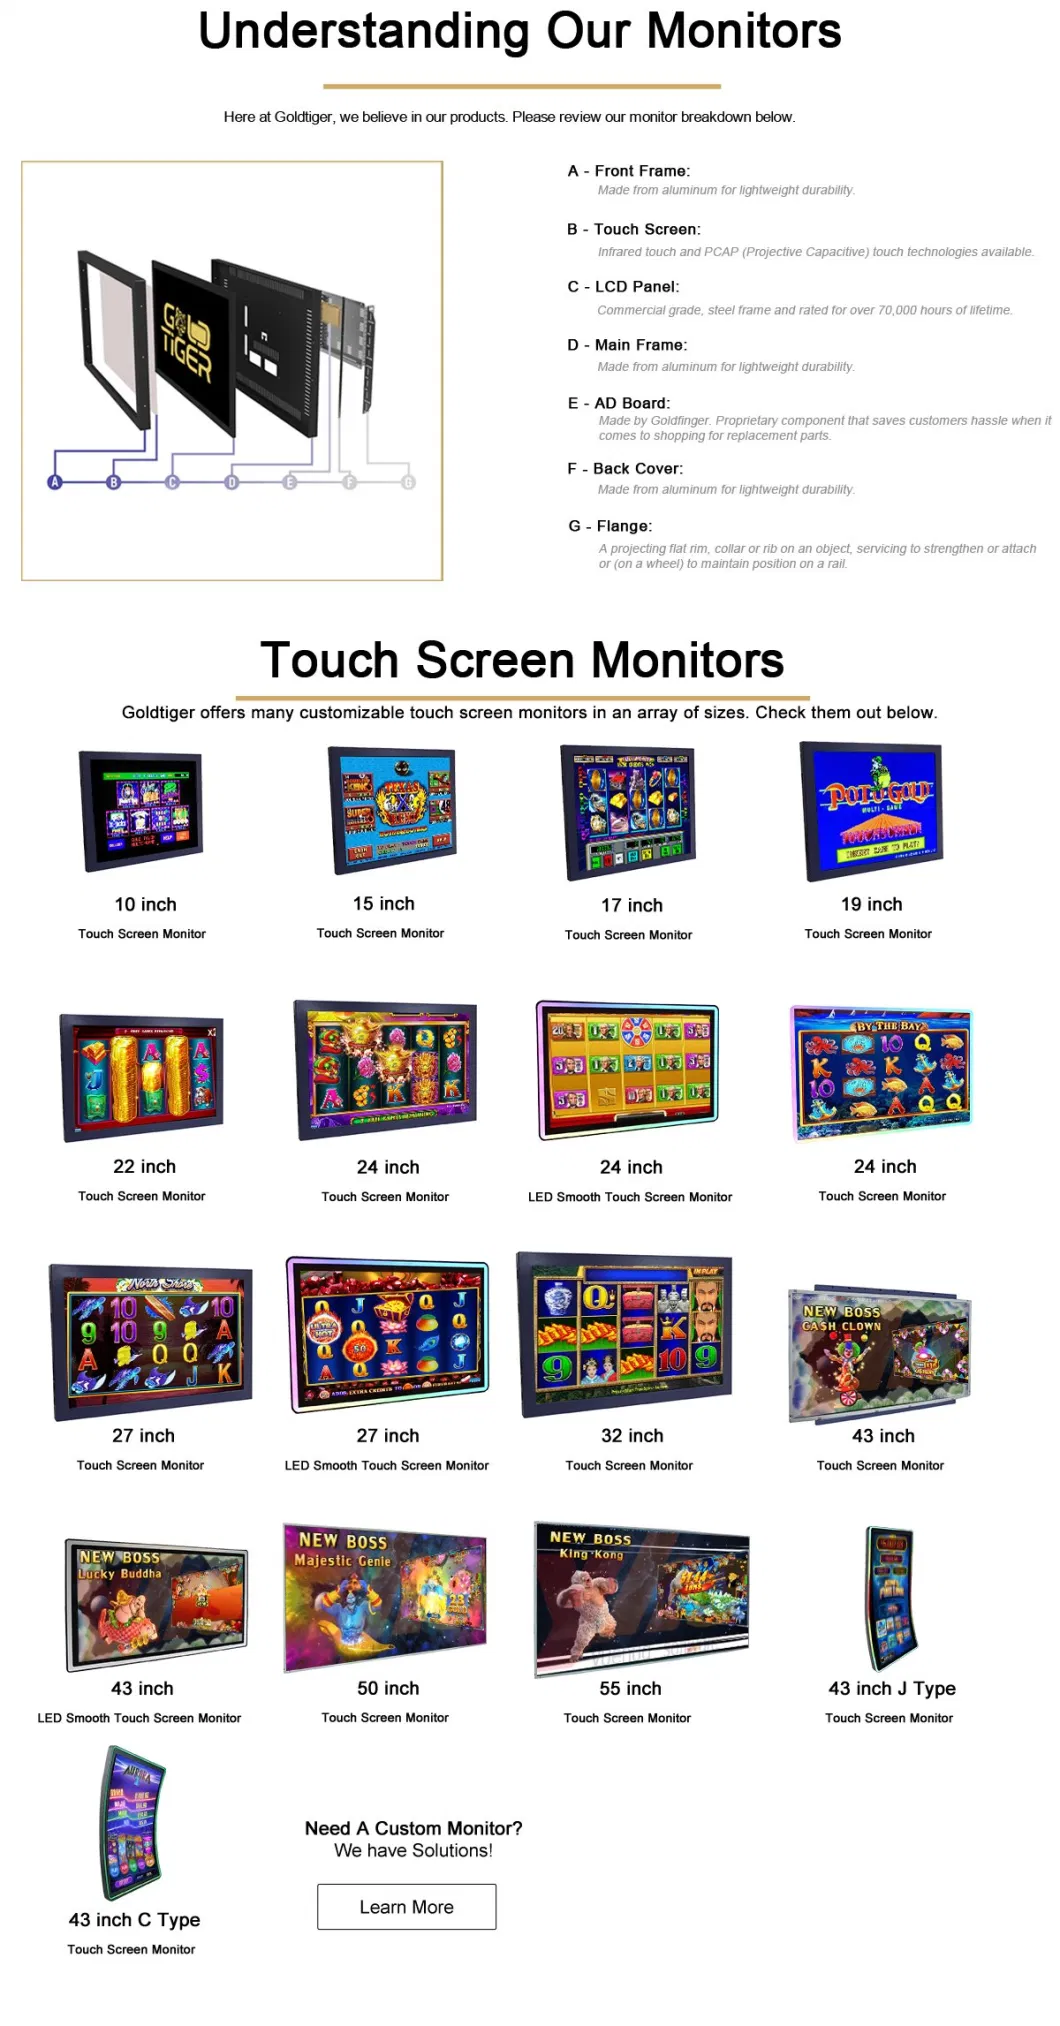 New Model Multi-Touch Frame USB 2.0 (Full-Speed) LCD TV Touch Computer Monitor Touch Screen for Slots Standing Mashins Game